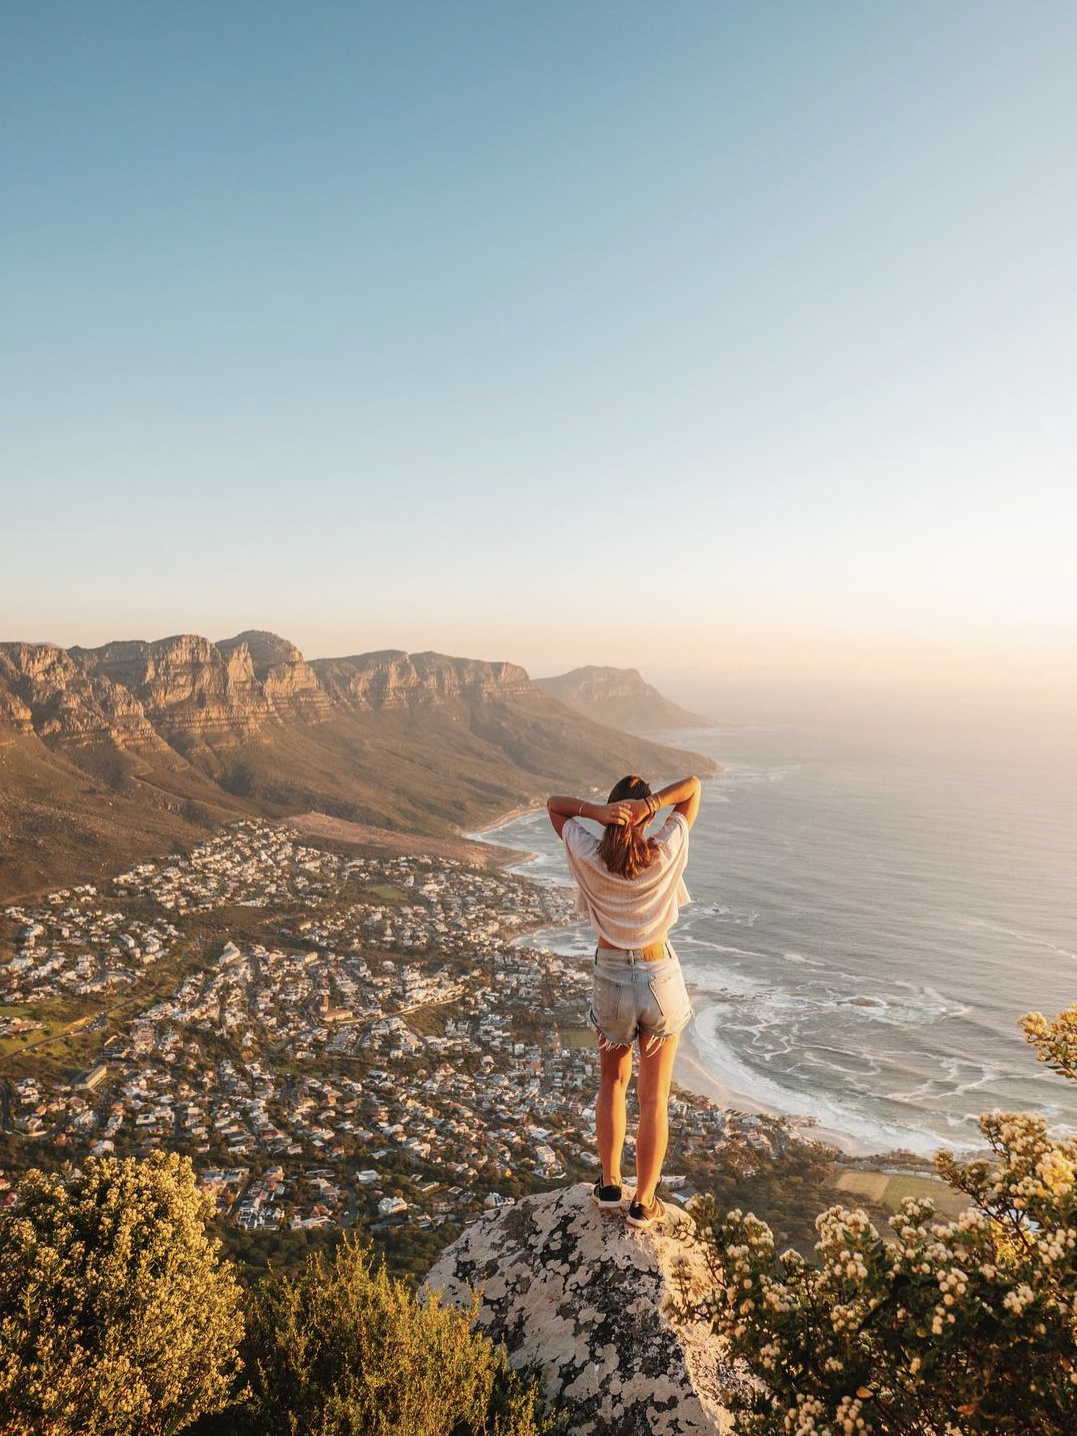 Taking in the views over the Mother City